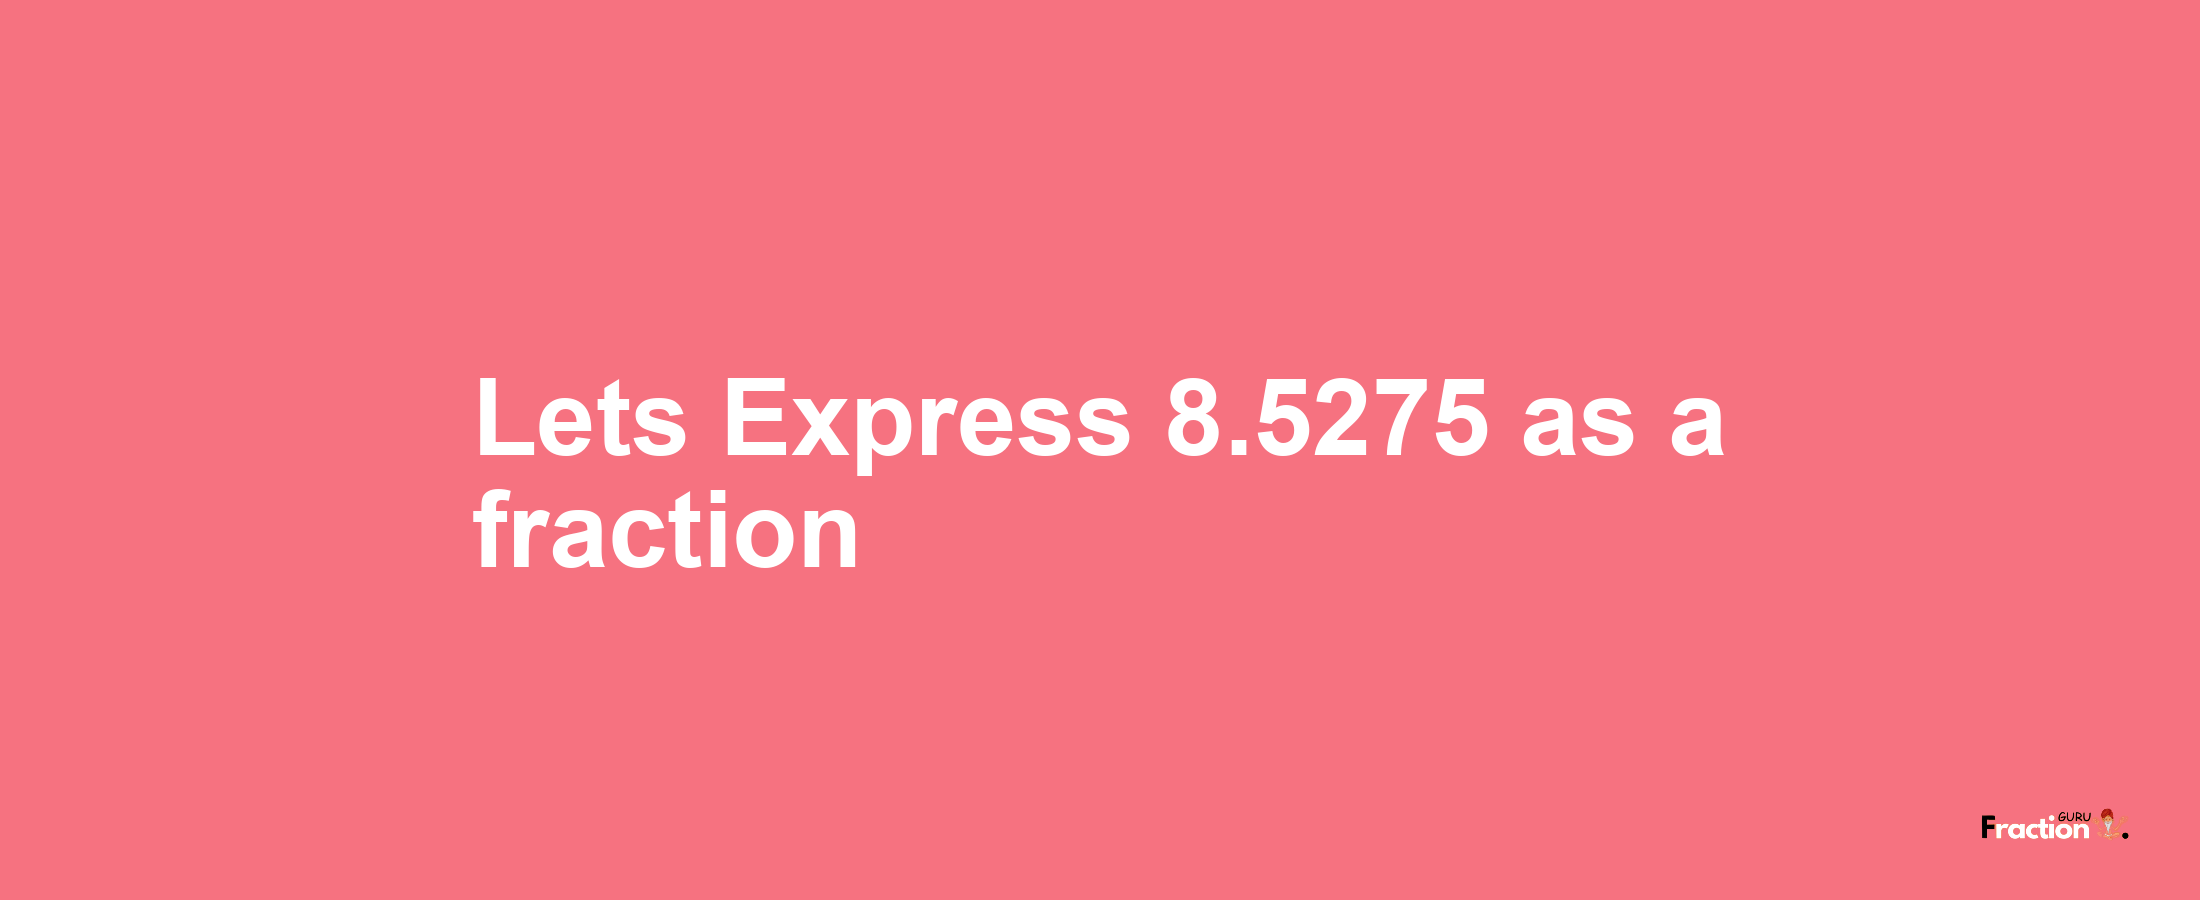 Lets Express 8.5275 as afraction